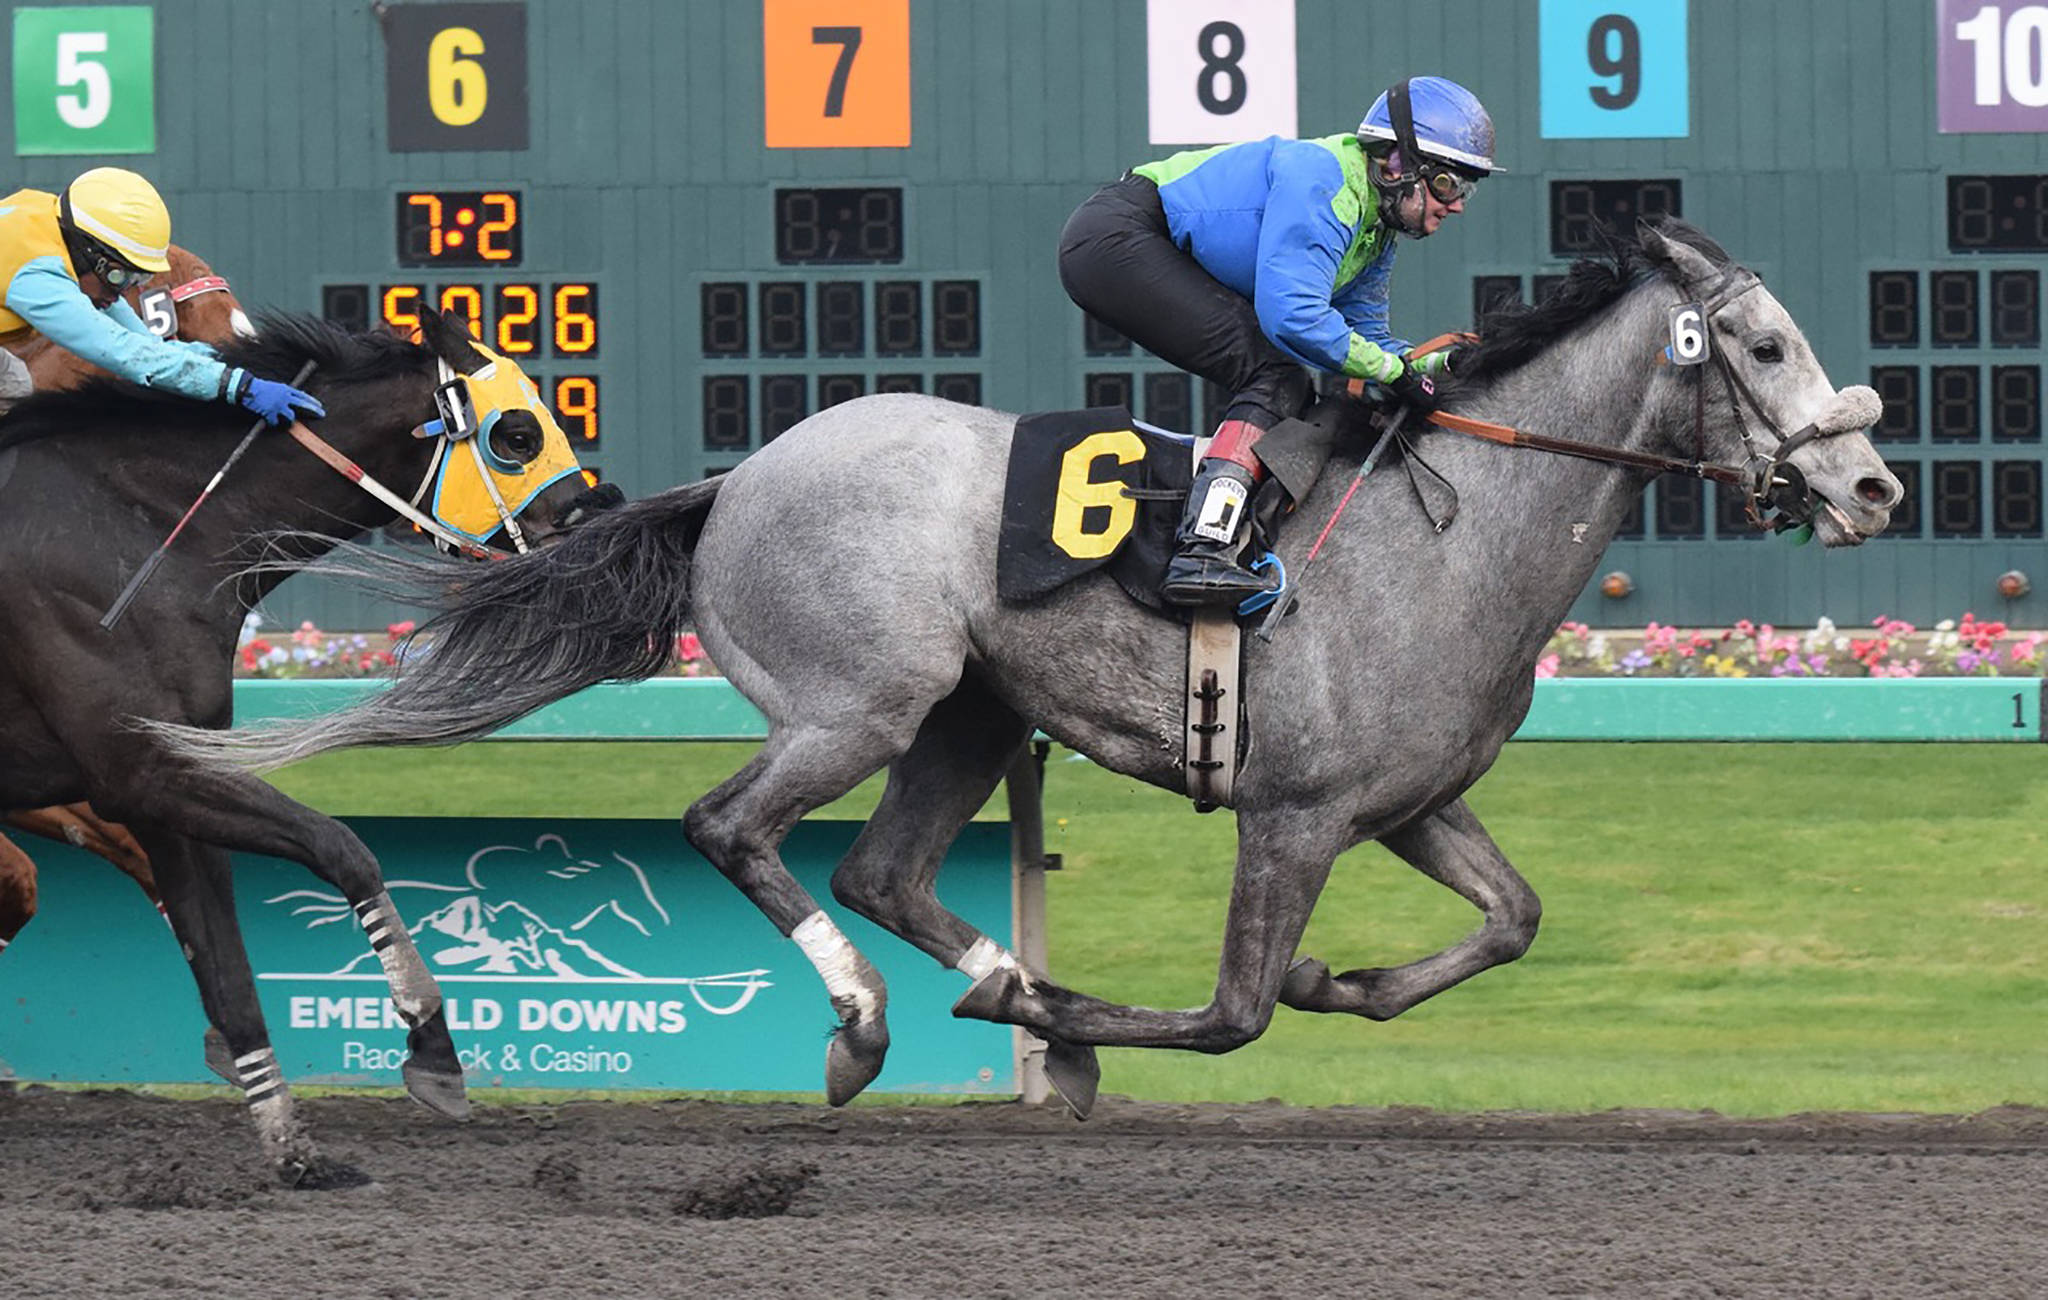 Eliska Kubinova rides Bob Is Back to victory in the first race of the new season at Emerald Downs on Saturday. It was Kubinova’s first win at the Auburn track in two years. RACHEL CIAMPI, Auburn Reporter